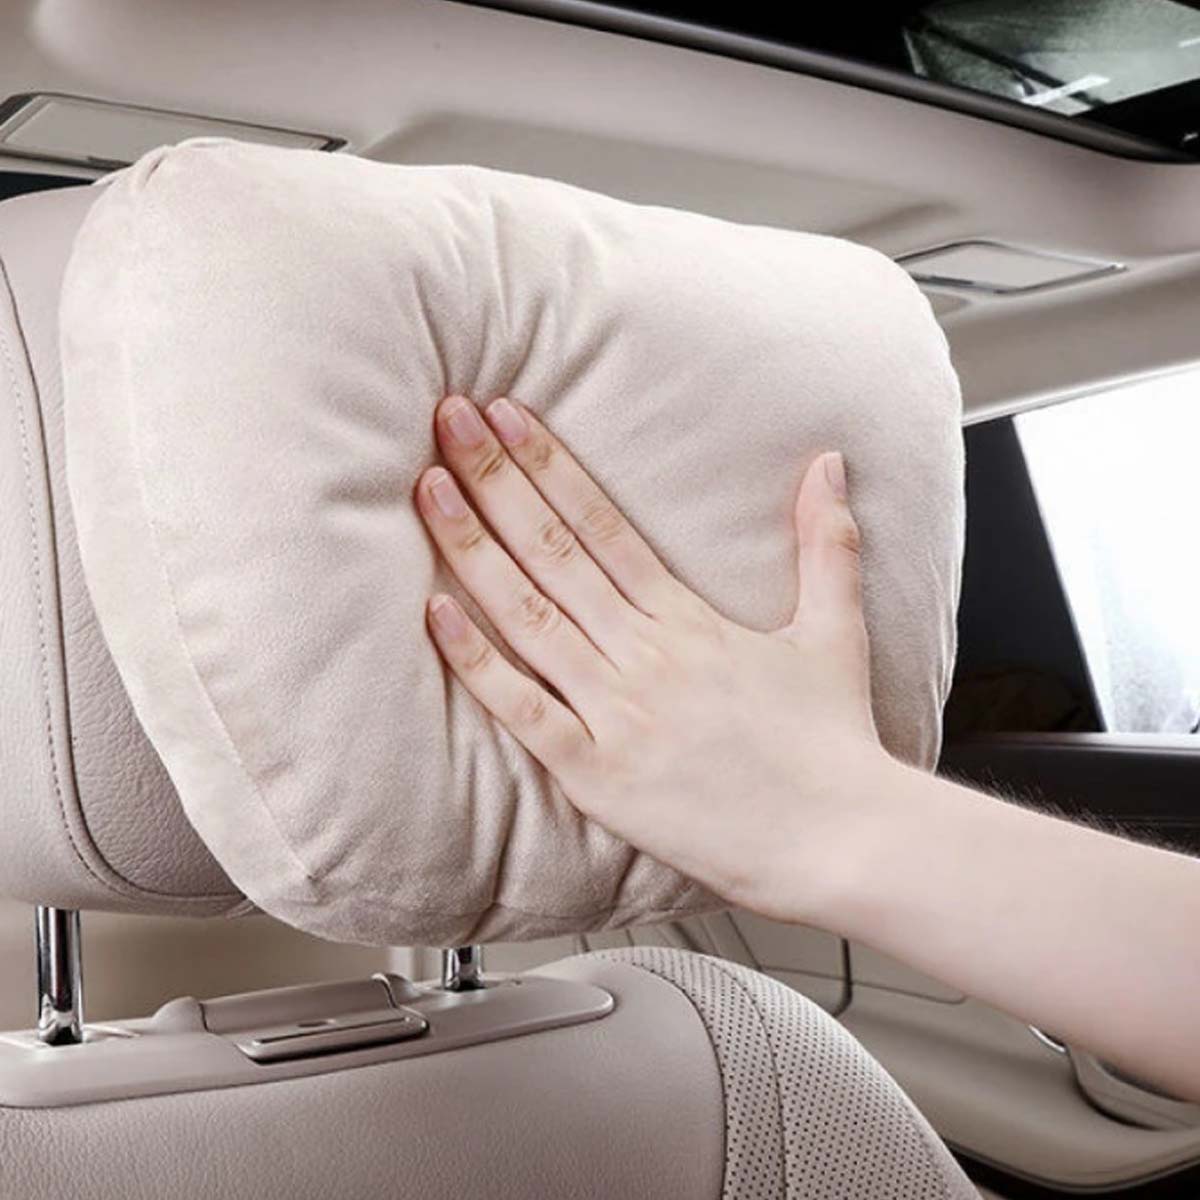 Premium Car Headrest Neck Support Seat with Lumbar Support Design: Soft, Universal, and Adjustable Car Neck Pillow and Waist Pillow for Enhanced Comfort and Ergonomics